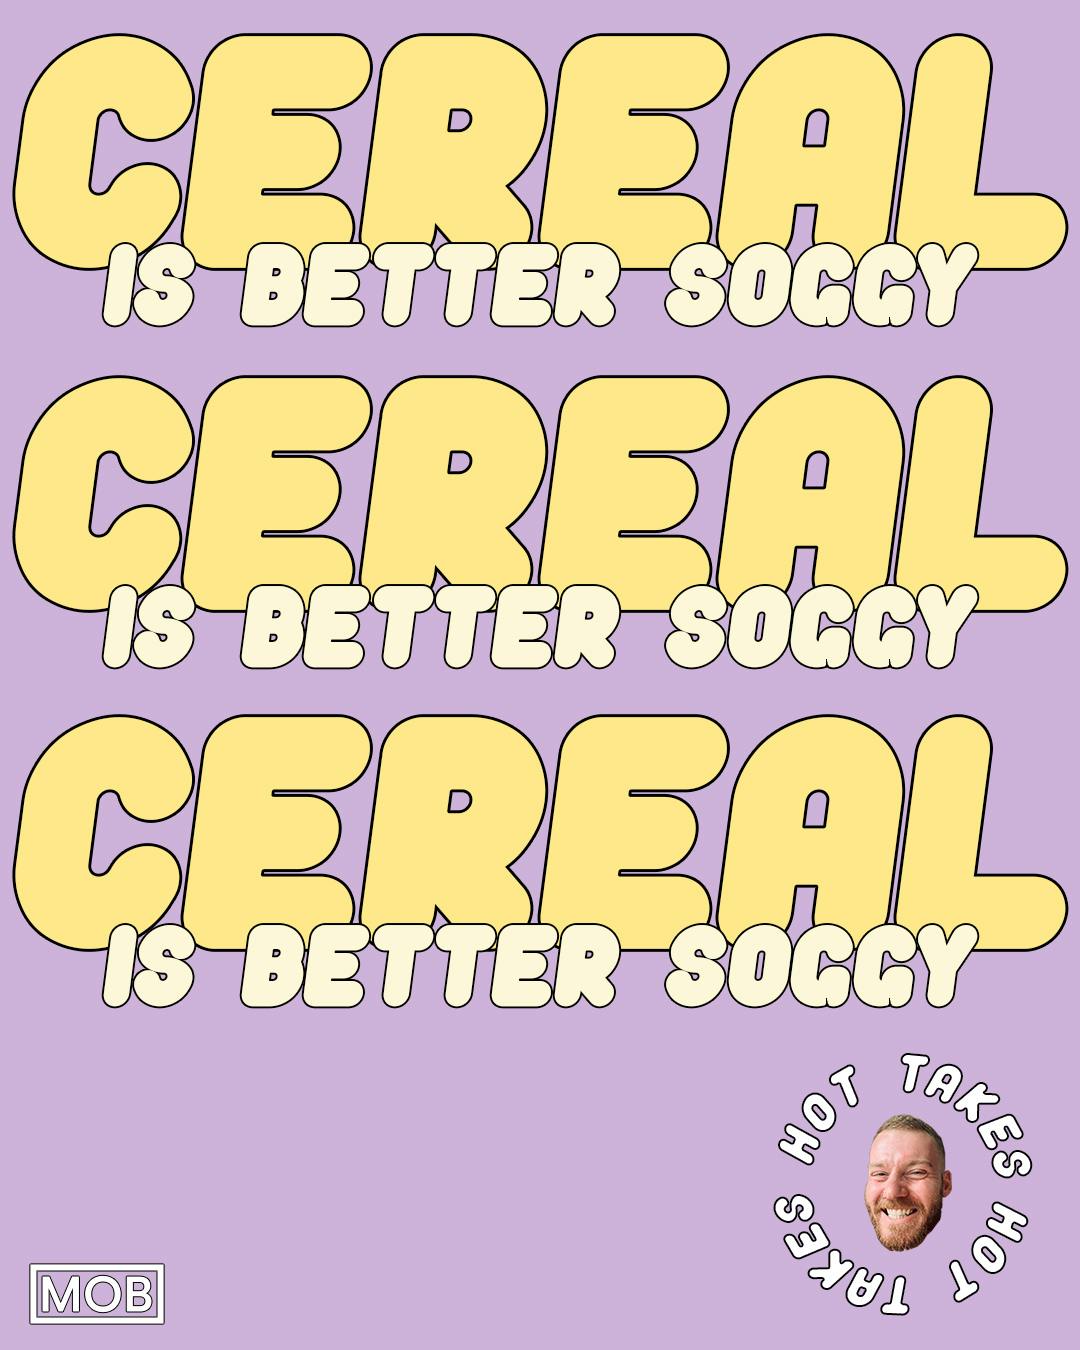 Cereal is better soggy2 1